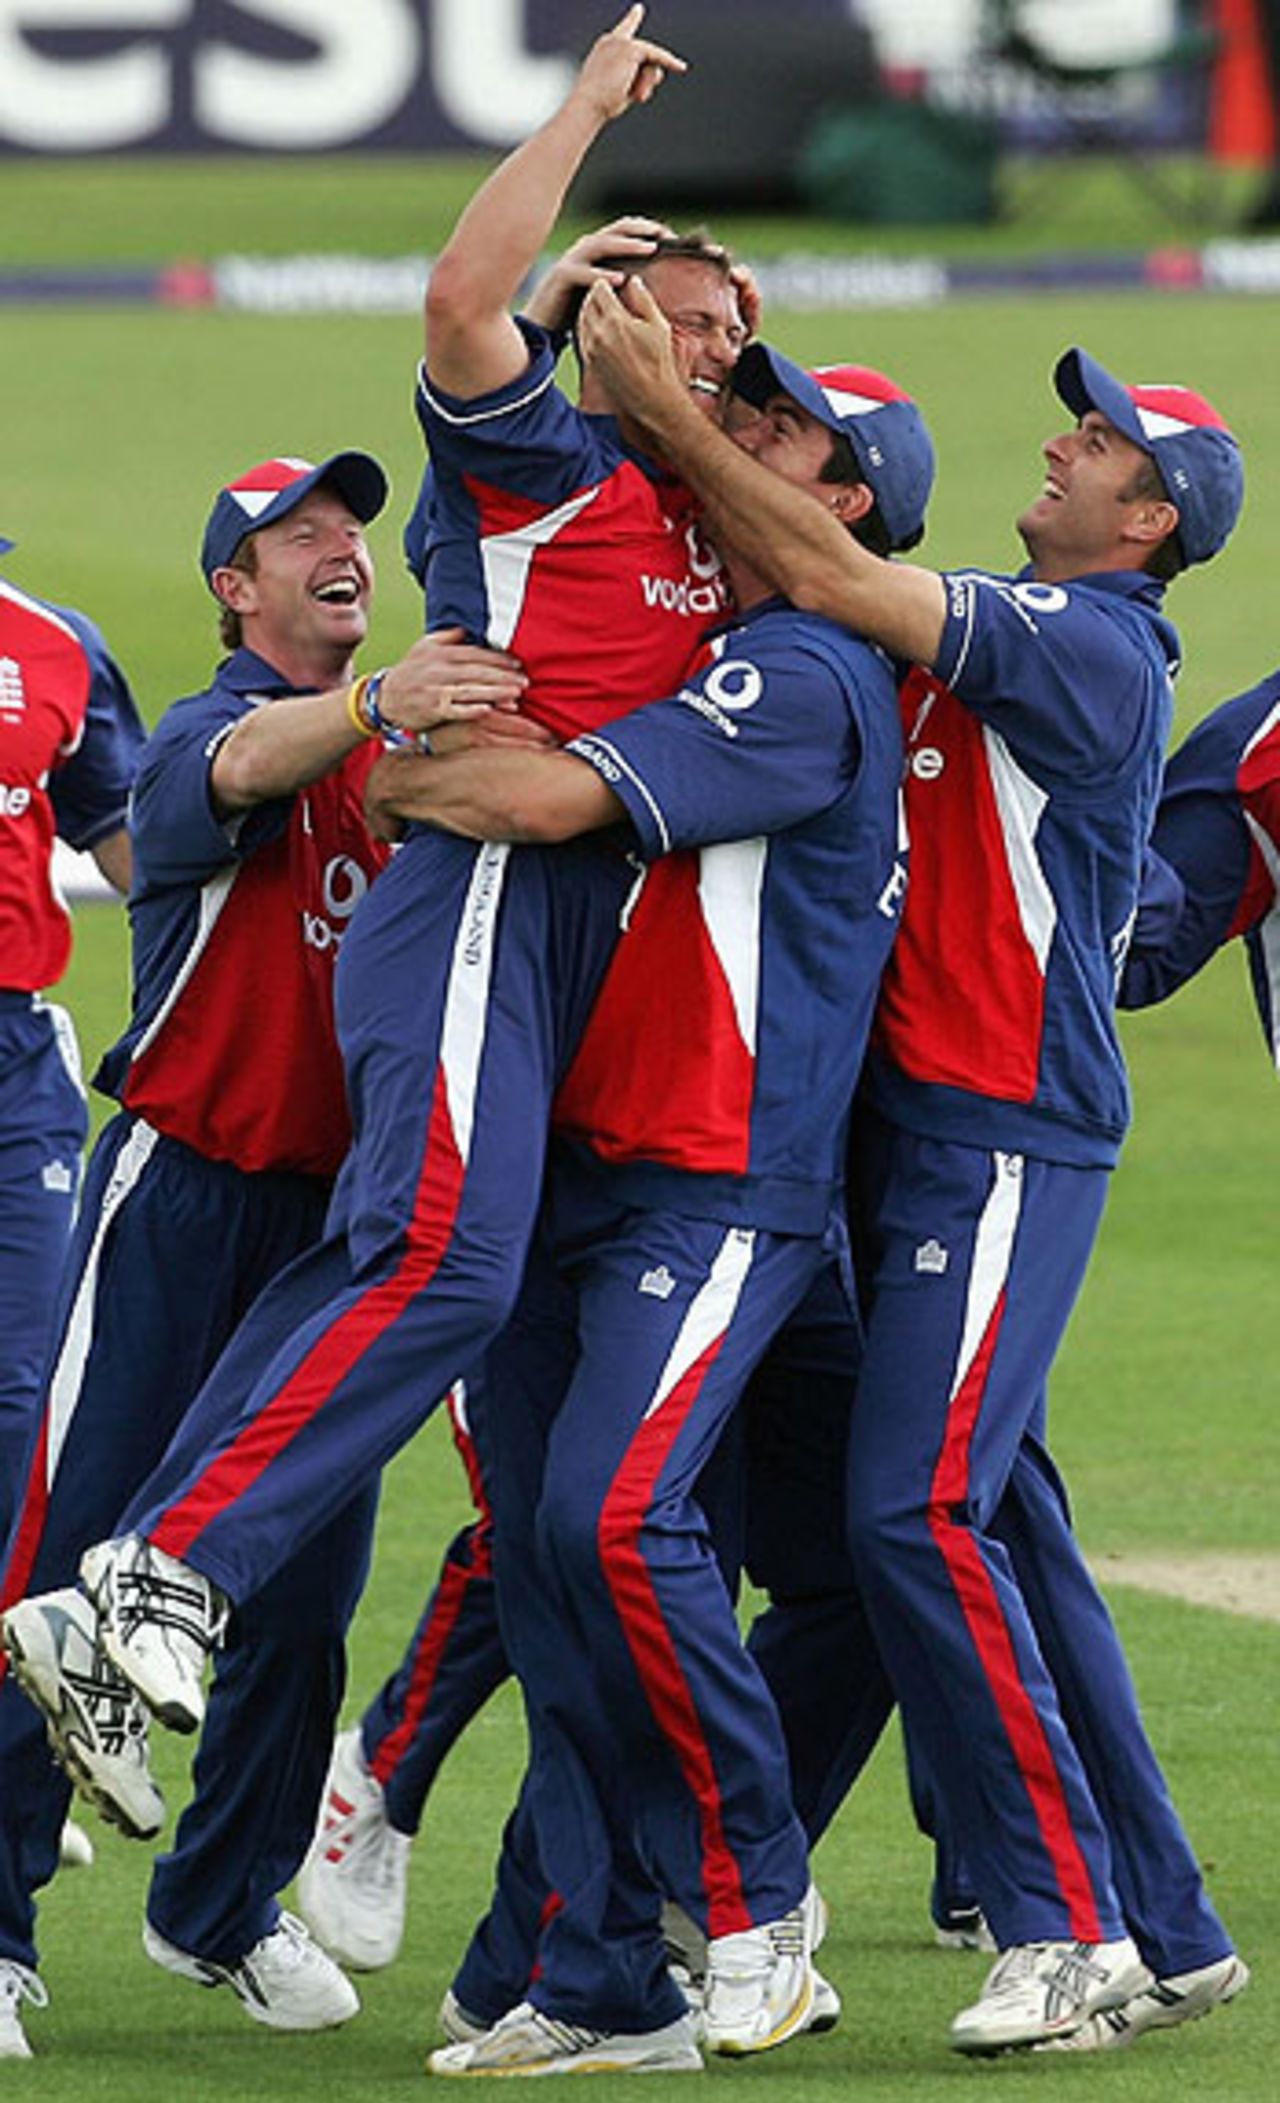 Darren Gough is mobbed by his team-mates after completing a hat-trick against Hampshire, June 11, 2005